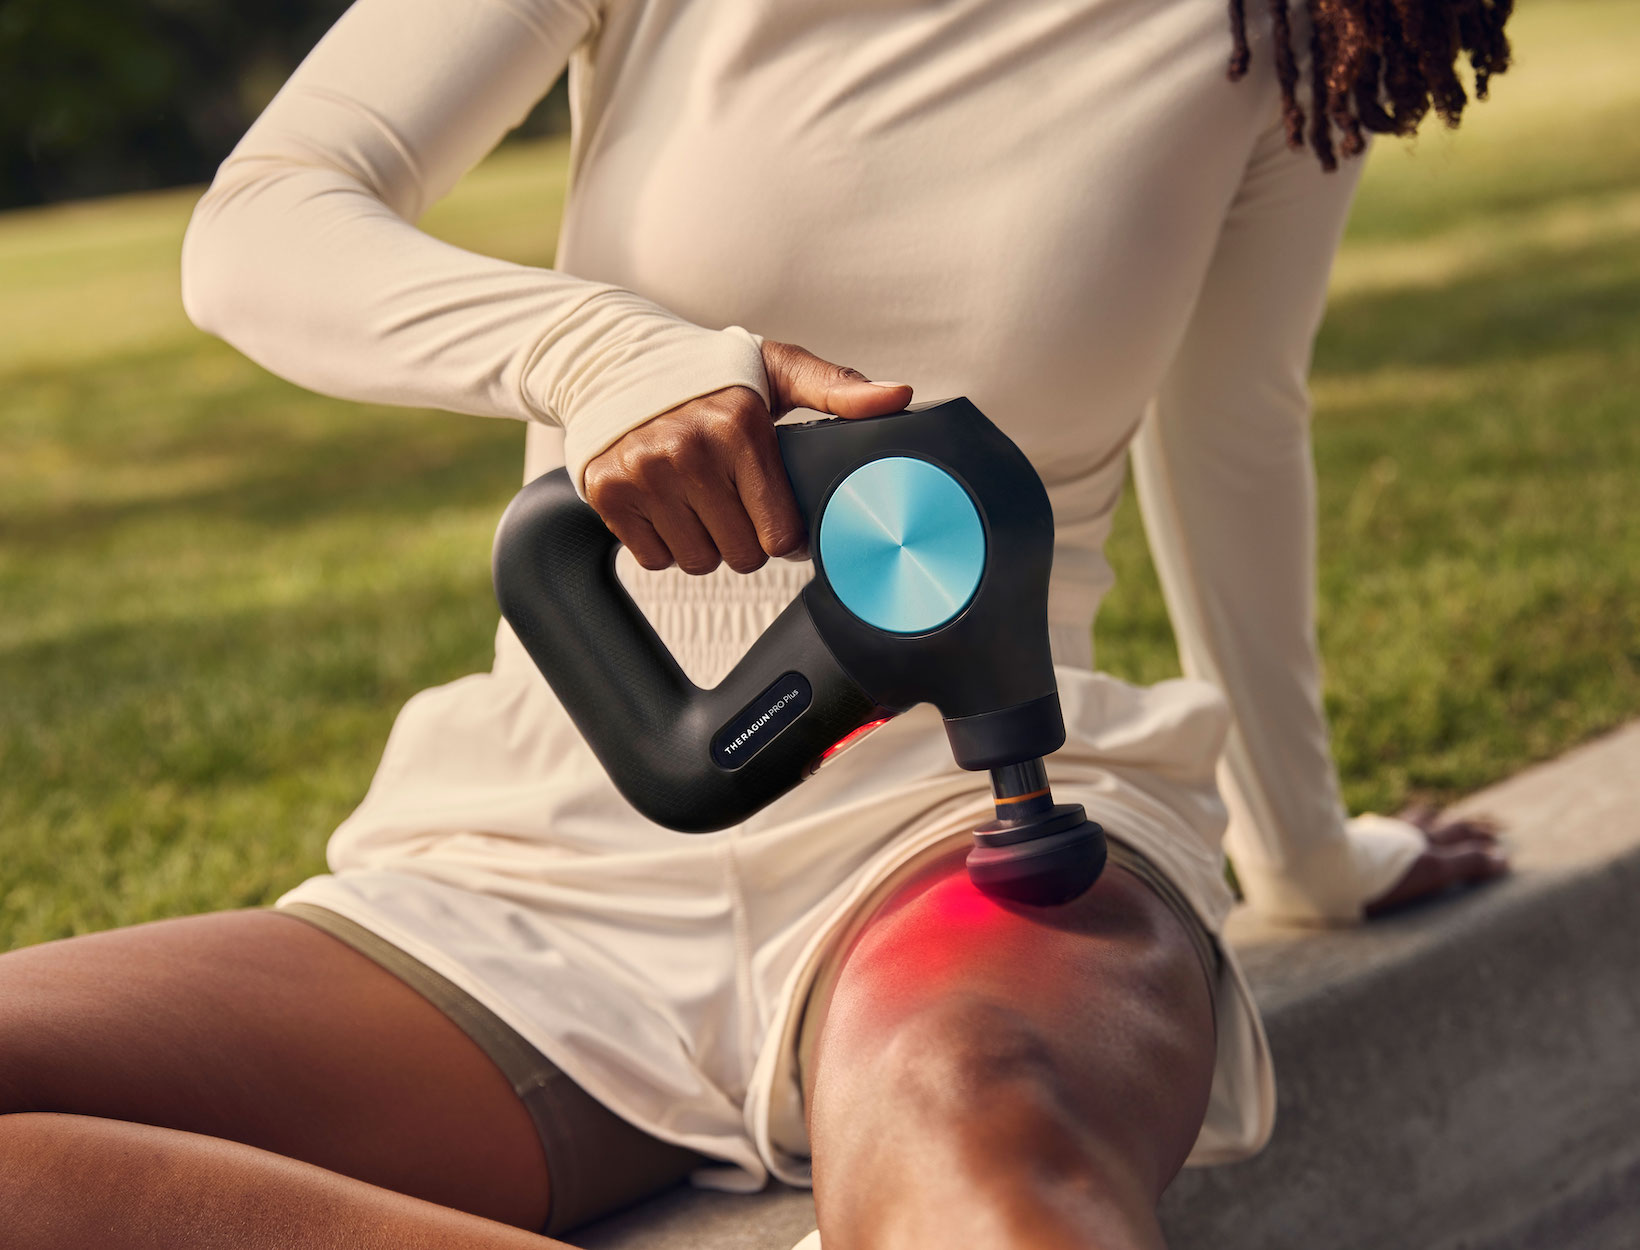 Best Massage Gun For Back Pain - Hands-On Picks Tested And Explained